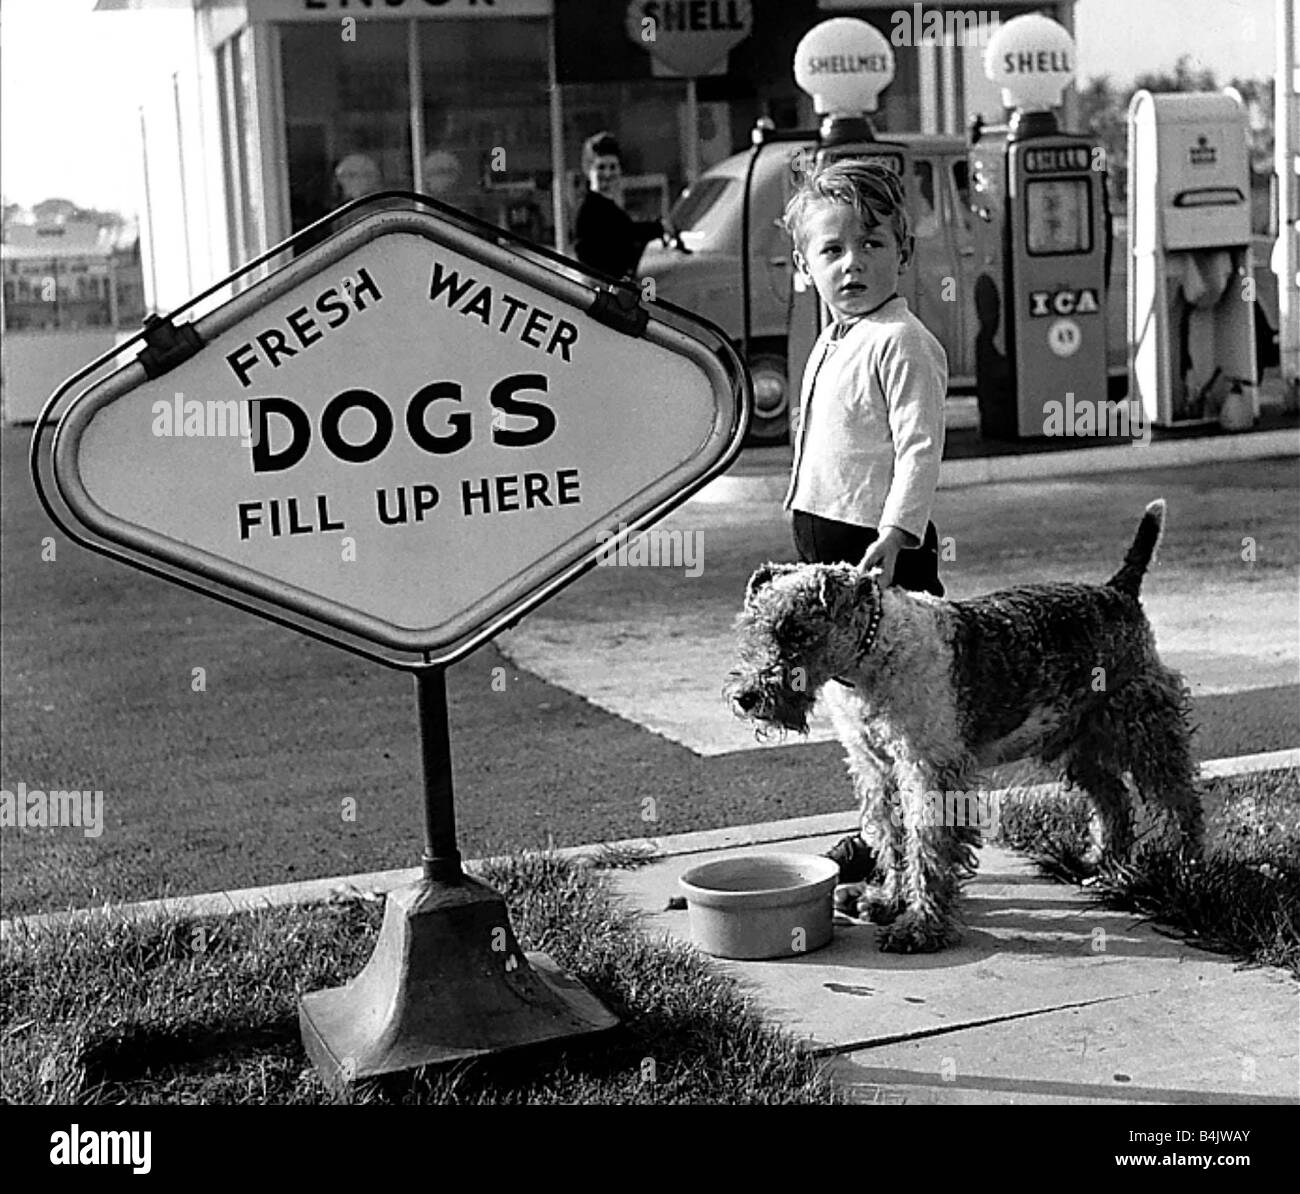 Animals Humour Dogs October 1959 Peter Monkhouse and his pup Snook at the shell garage near Manchester Peter has taken his dog their to fill up at the Dogs pump Sign fresh Water Dogs Fill up here Stock Photo